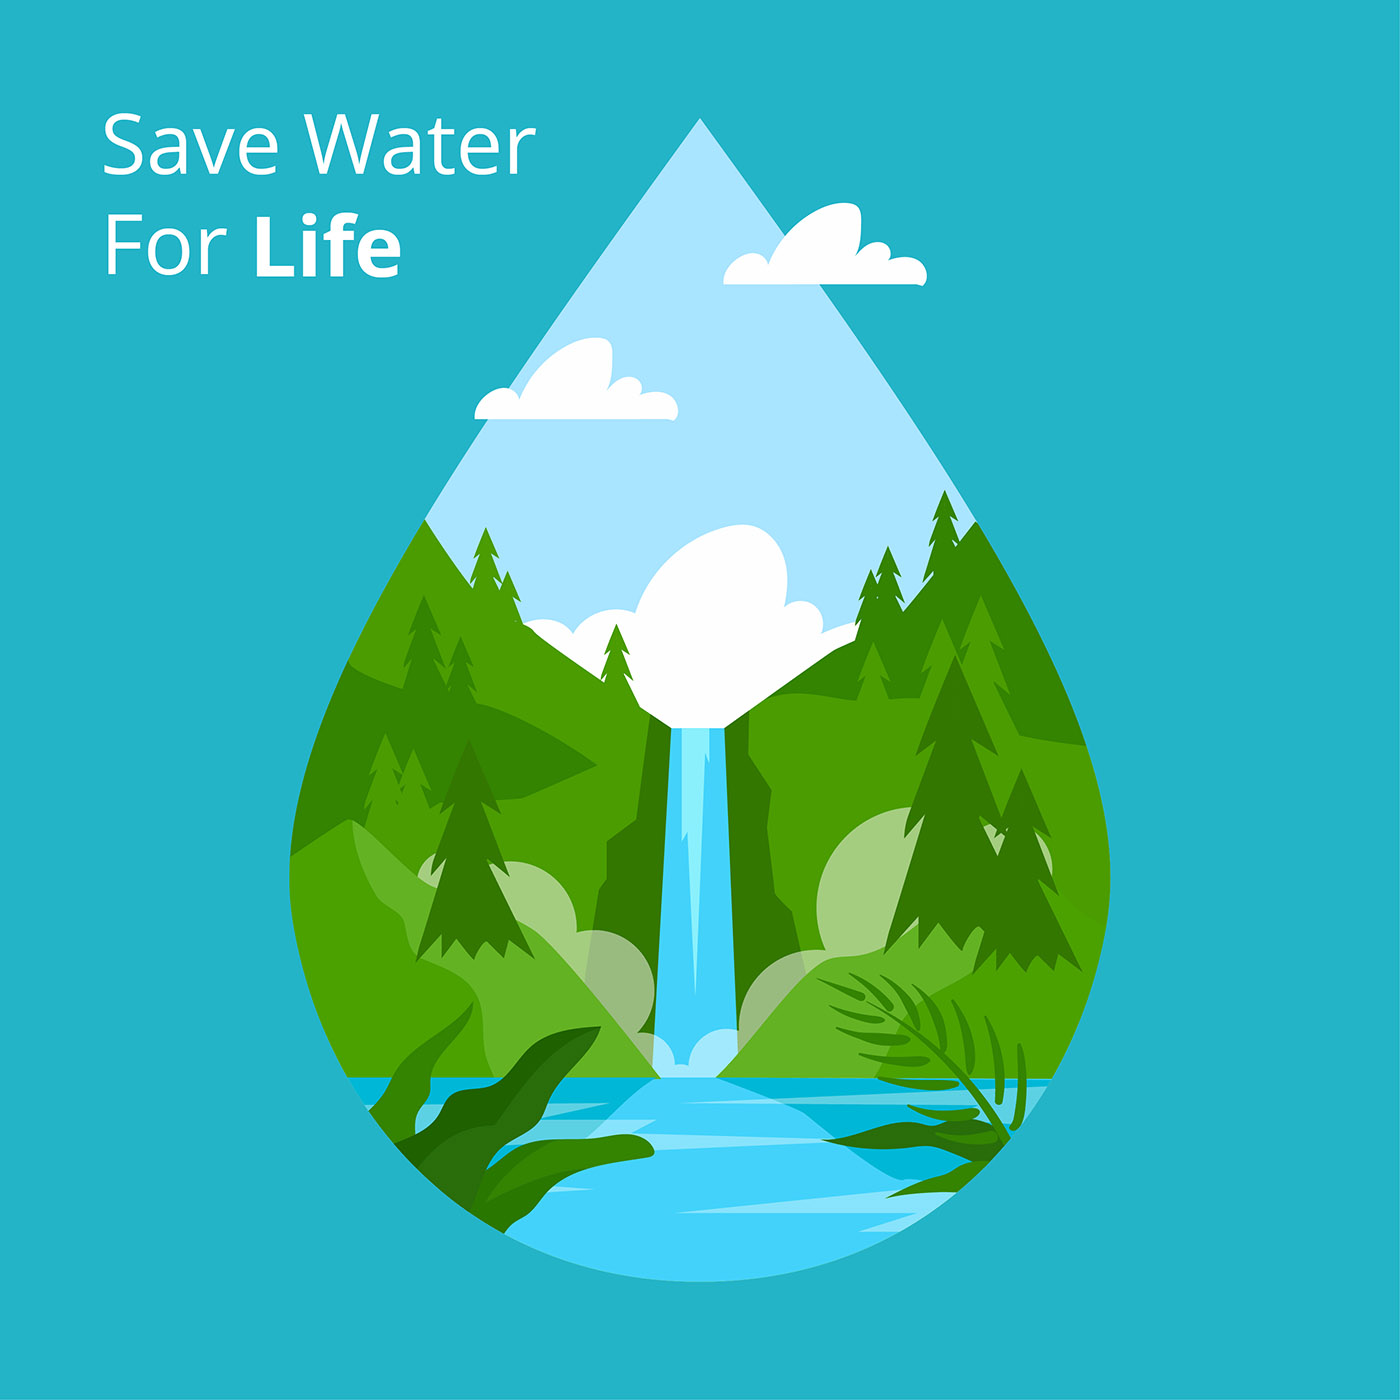 Save Water For Life Vector - Download Free Vectors, Clipart ...